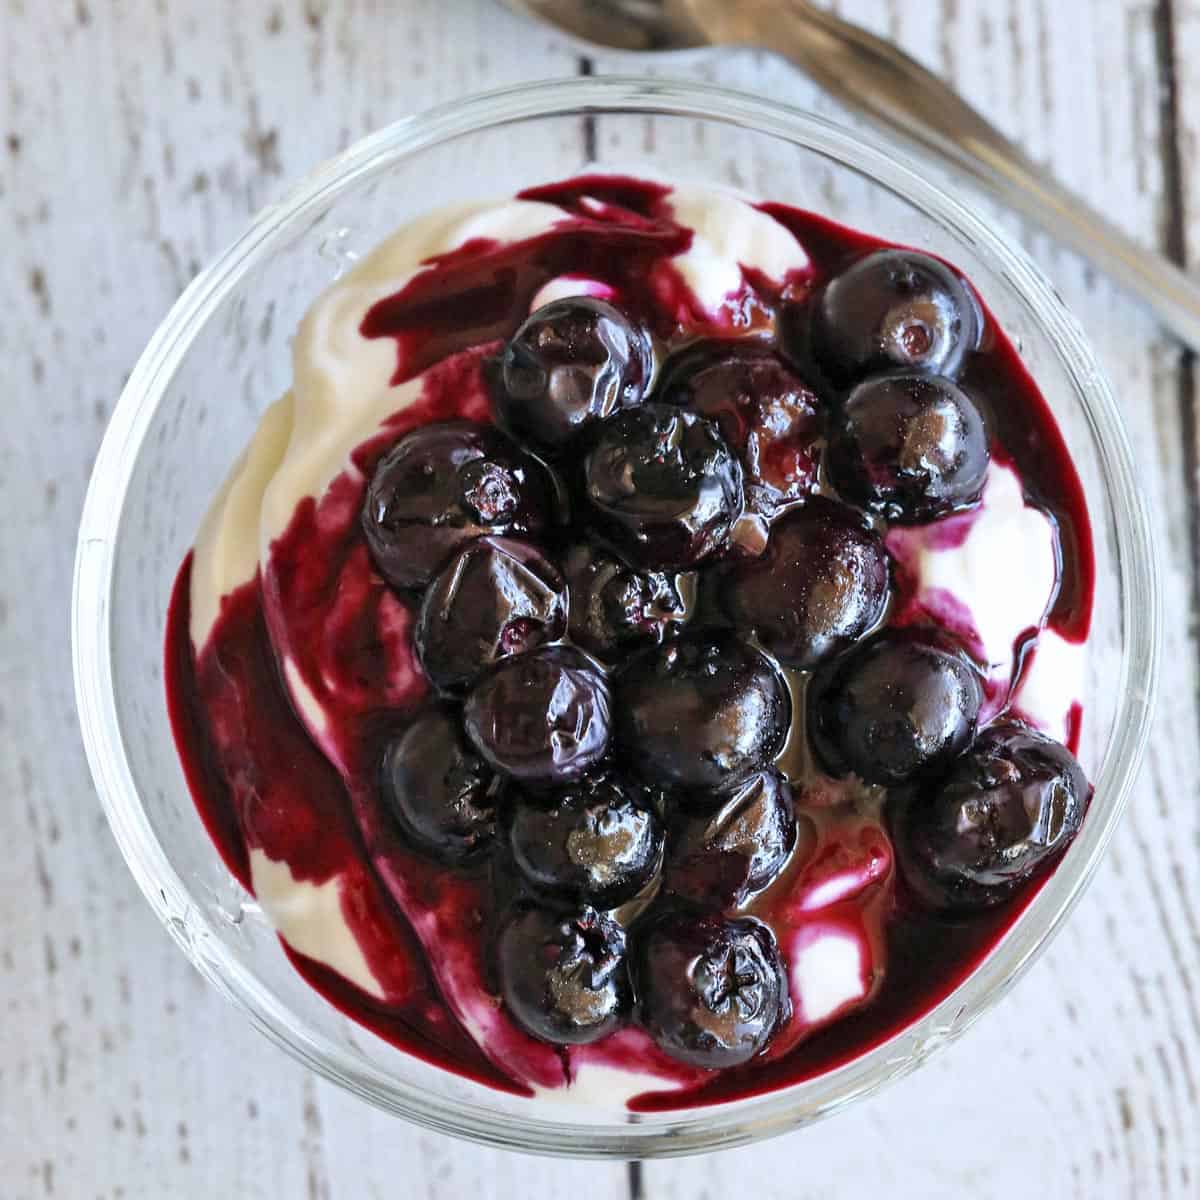 Greek yogurt topped with blueberry compote.